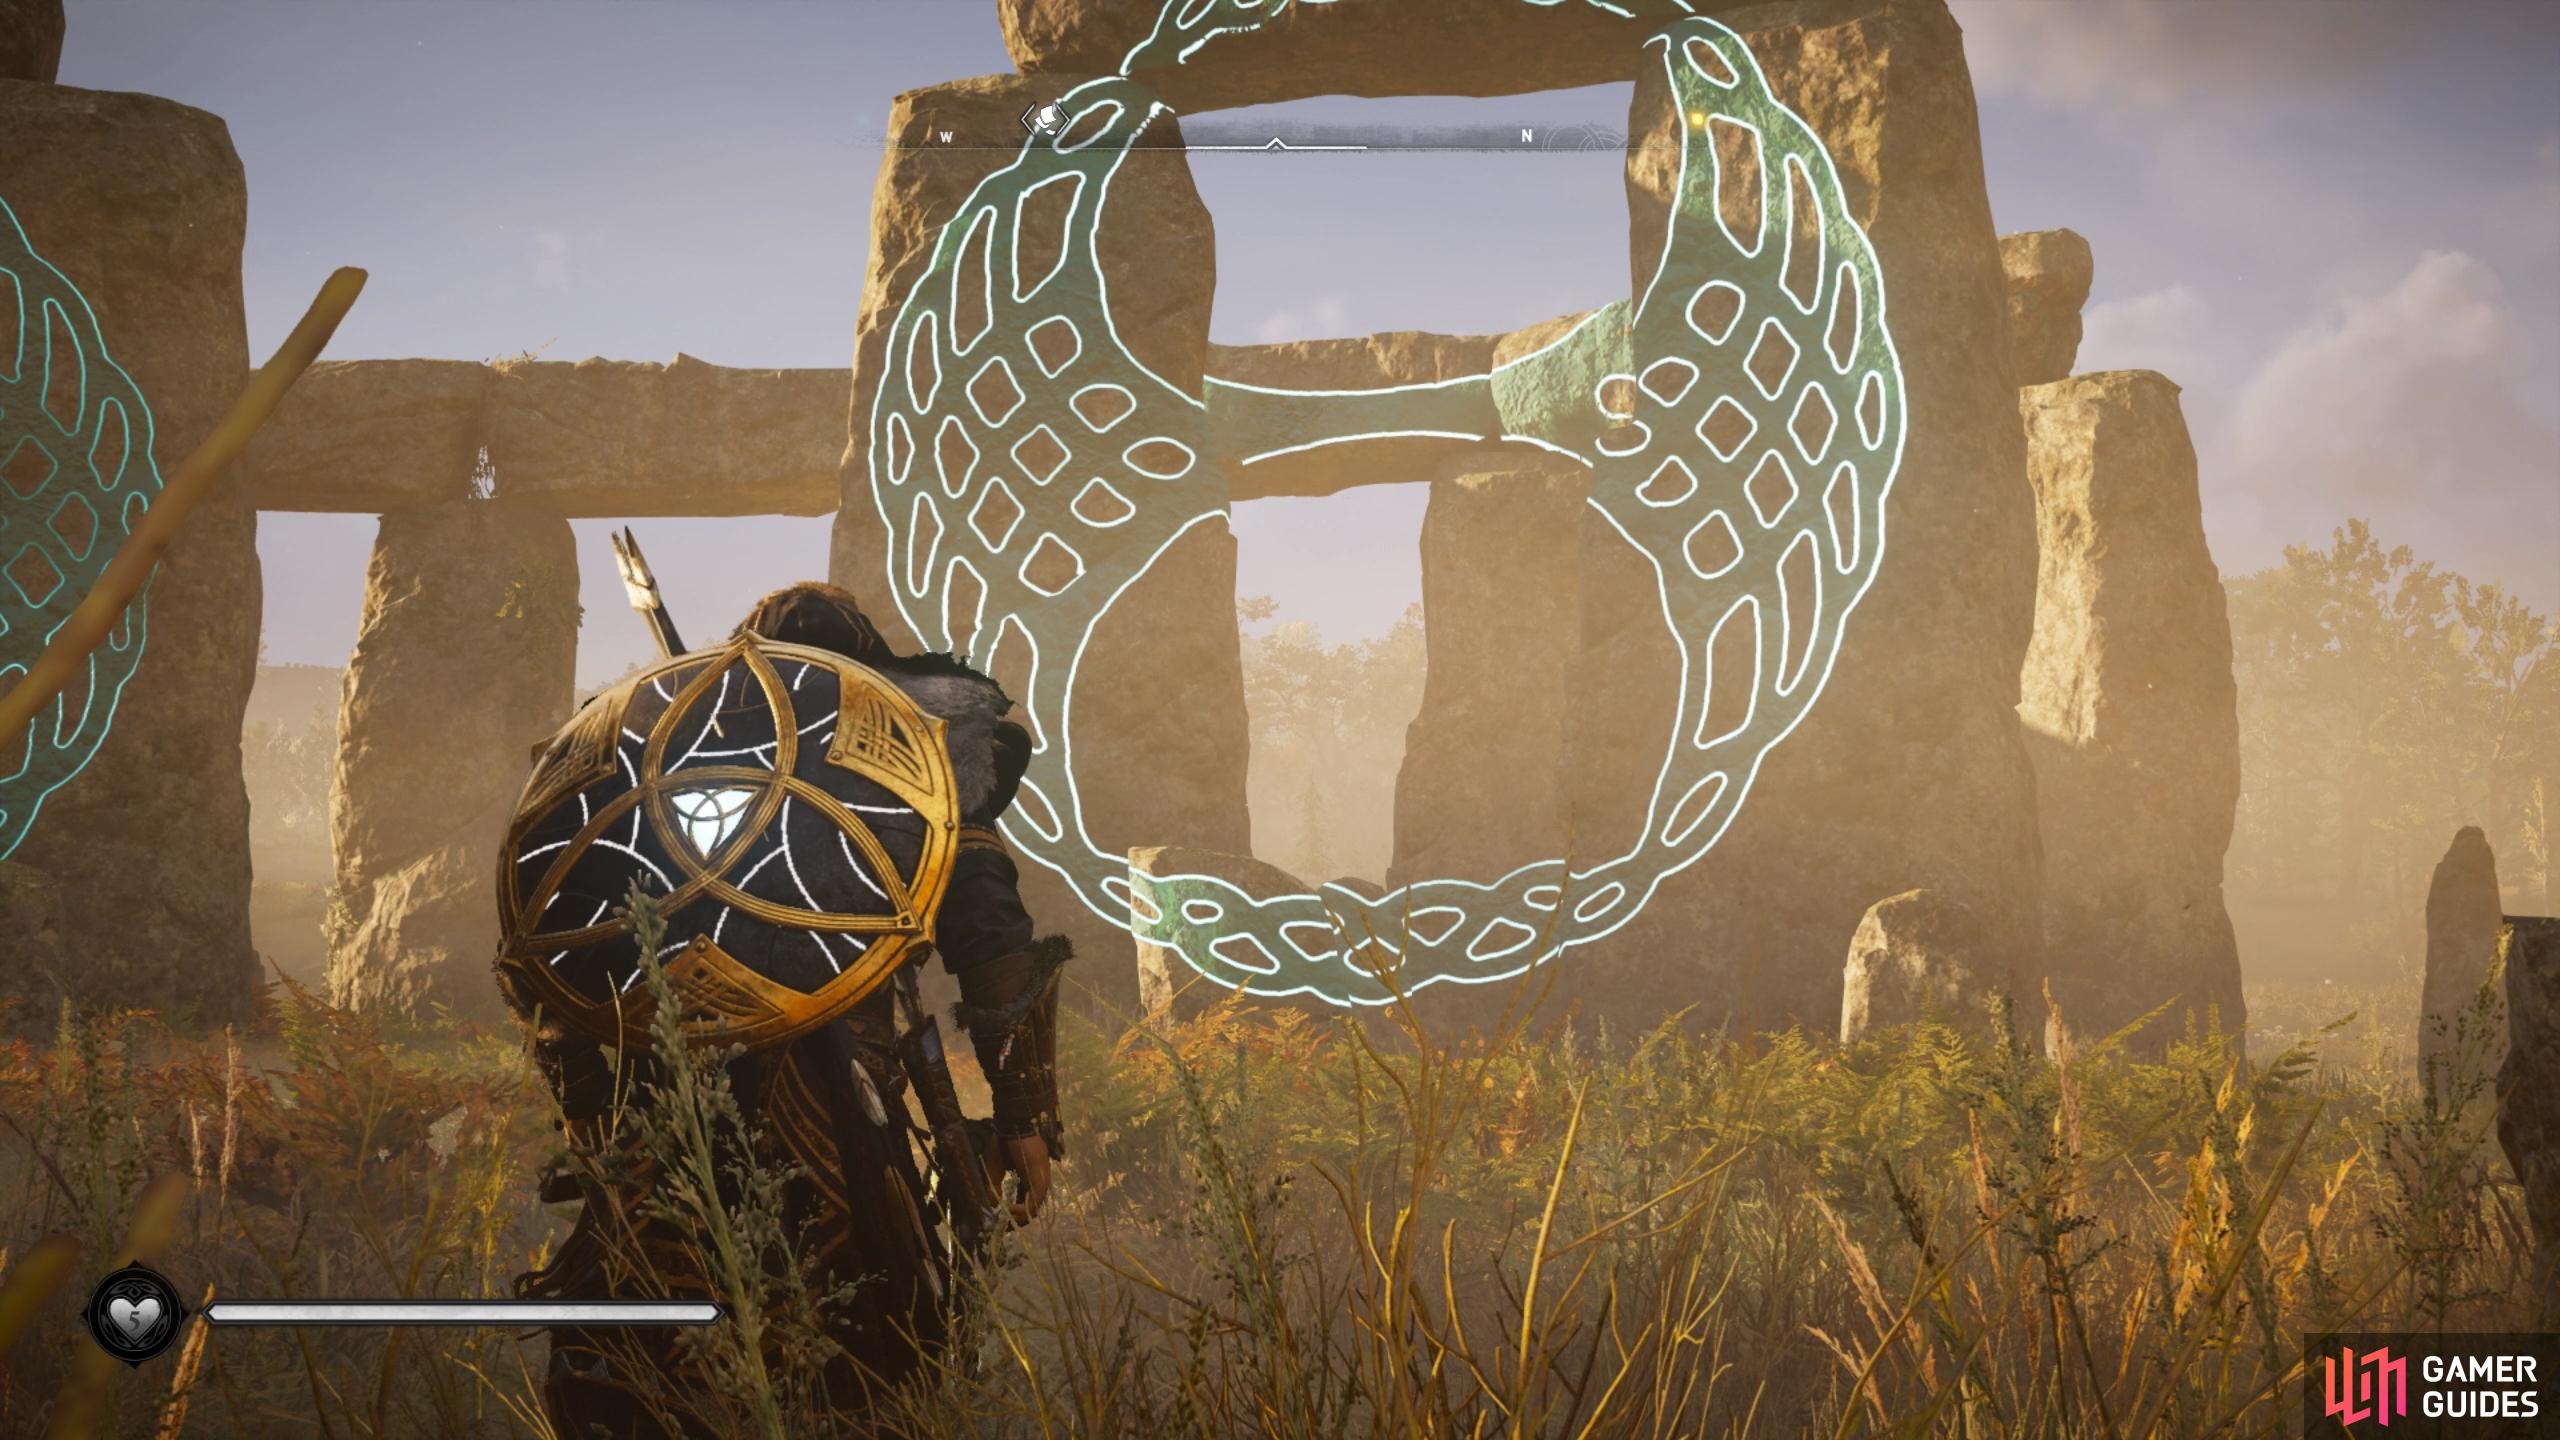 Youll need to face northwest when standing in the monument to align the symbol.